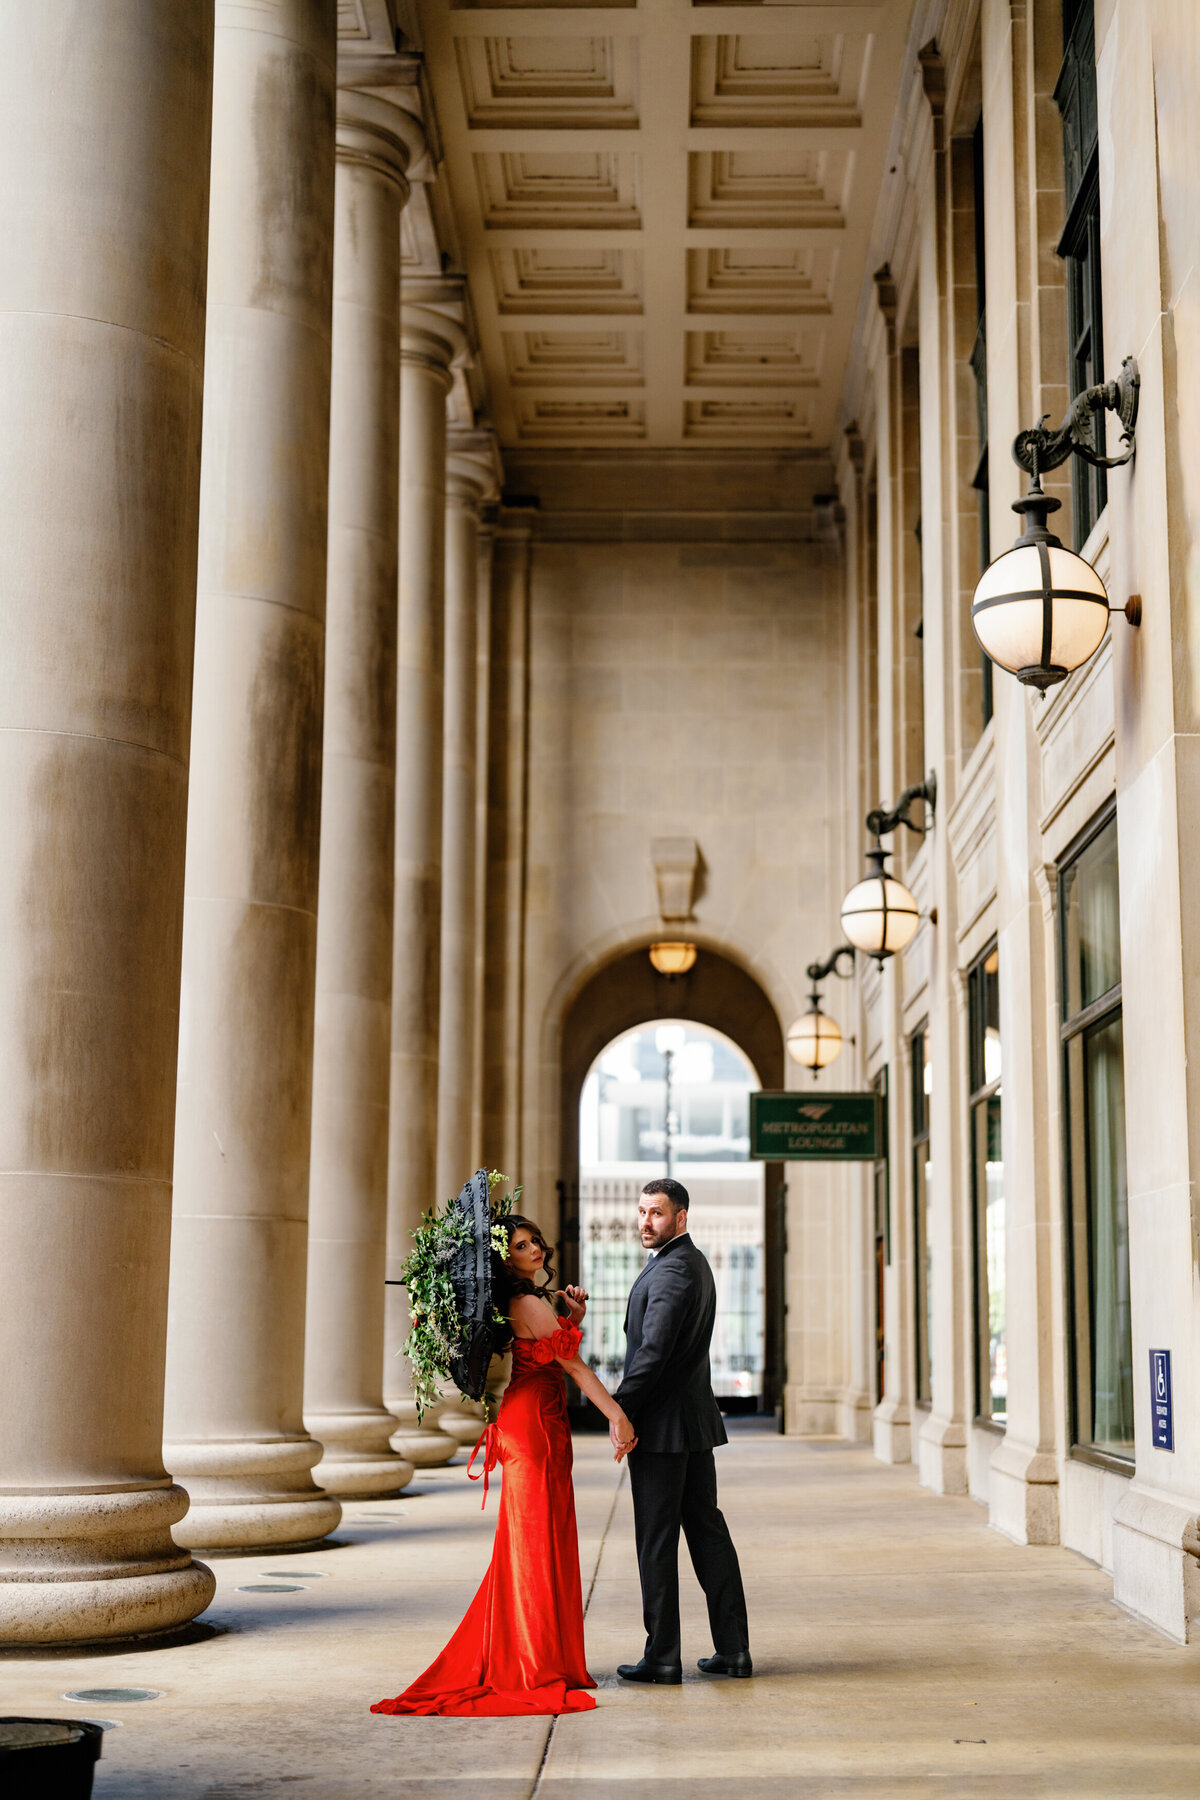 Aspen-Avenue-Chicago-Wedding-Photographer-Union-Station-Chicago-Theater-Engagement-Session-Timeless-Romantic-Red-Dress-Editorial-Stemming-From-Love-Bry-Jean-Artistry-The-Bridal-Collective-True-to-color-Luxury-FAV-43